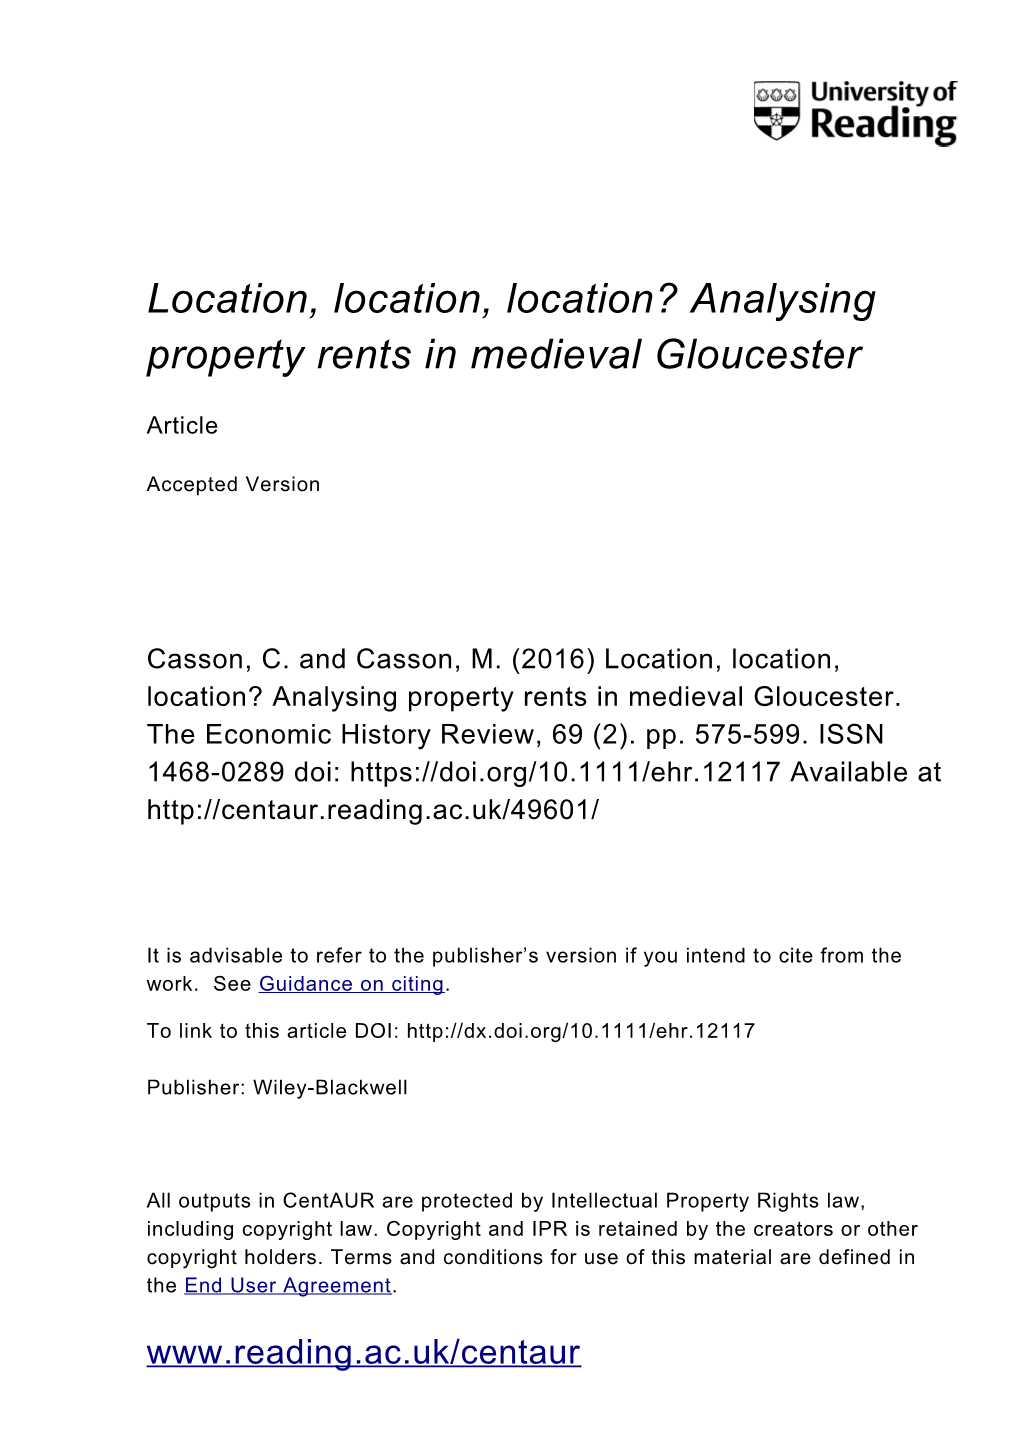 Analysing Property Rents in Medieval Gloucester